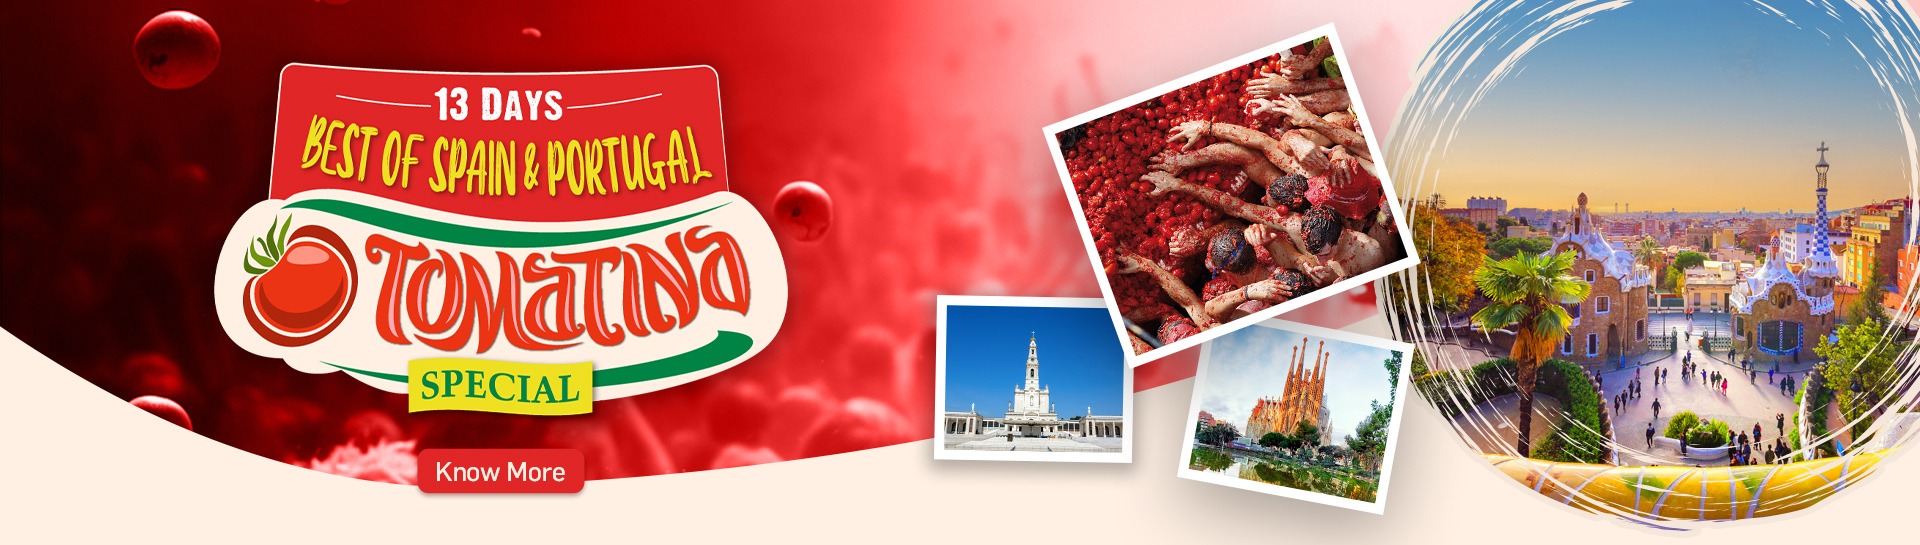 Best Of Spain & Portugal - Tomatina